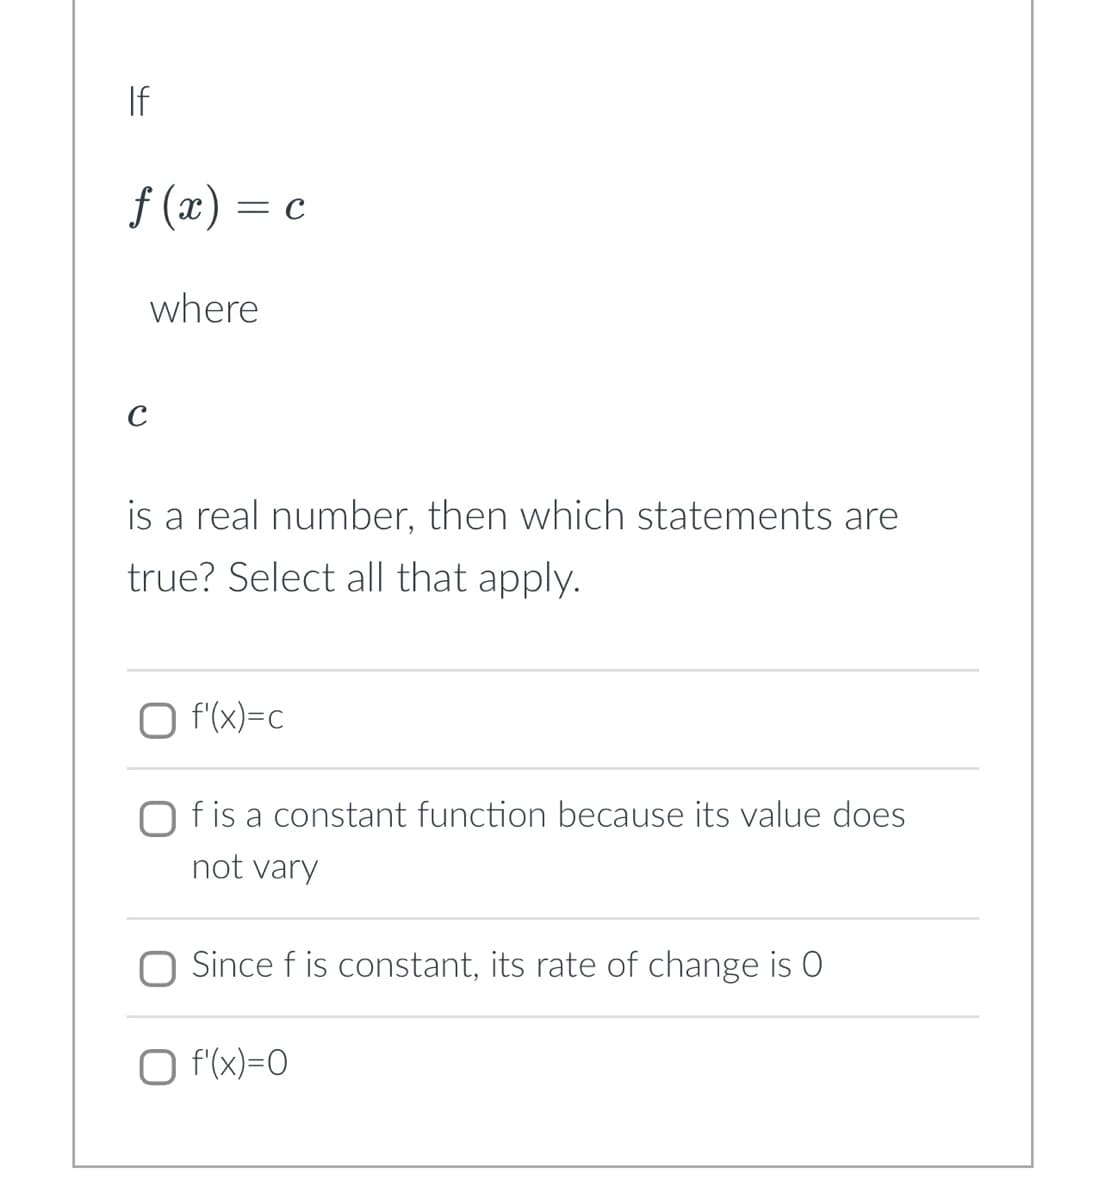 If
f(x) = c
where
is a real number, then which statements are
true? Select all that apply.
O f'(x)=c
f is a constant function because its value does
not vary
Since f is constant, its rate of change is O
O f'(x)=0